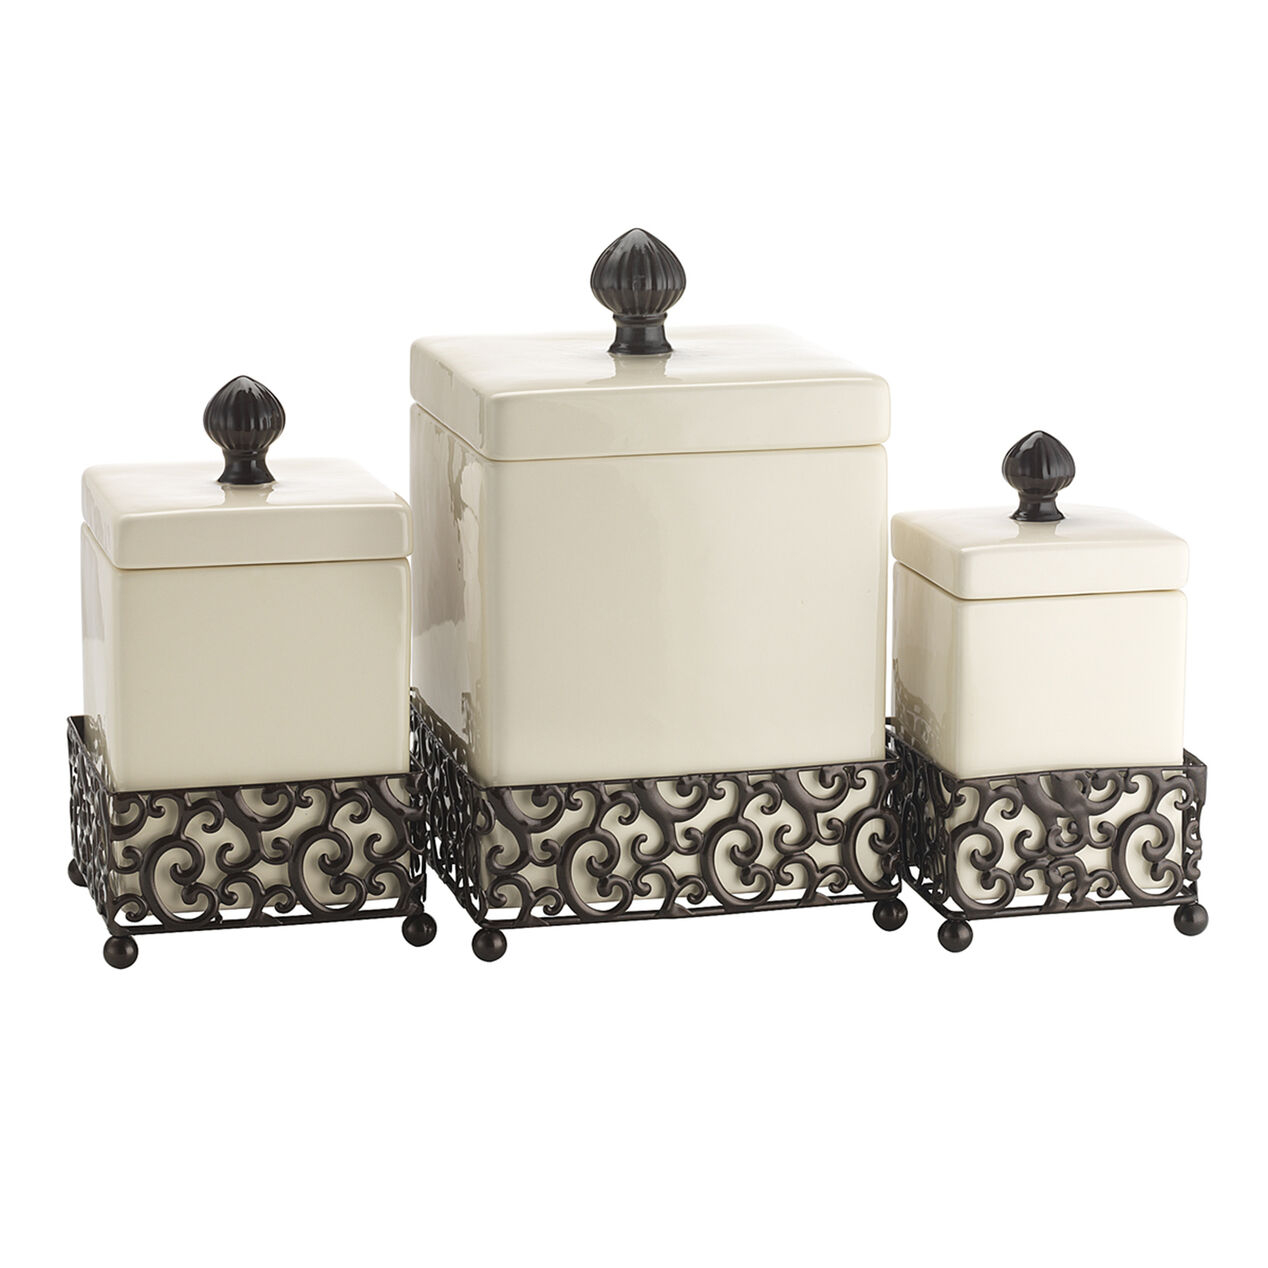 Decorative Kitchen Canisters Sets Youll Love In 2021 Visualhunt